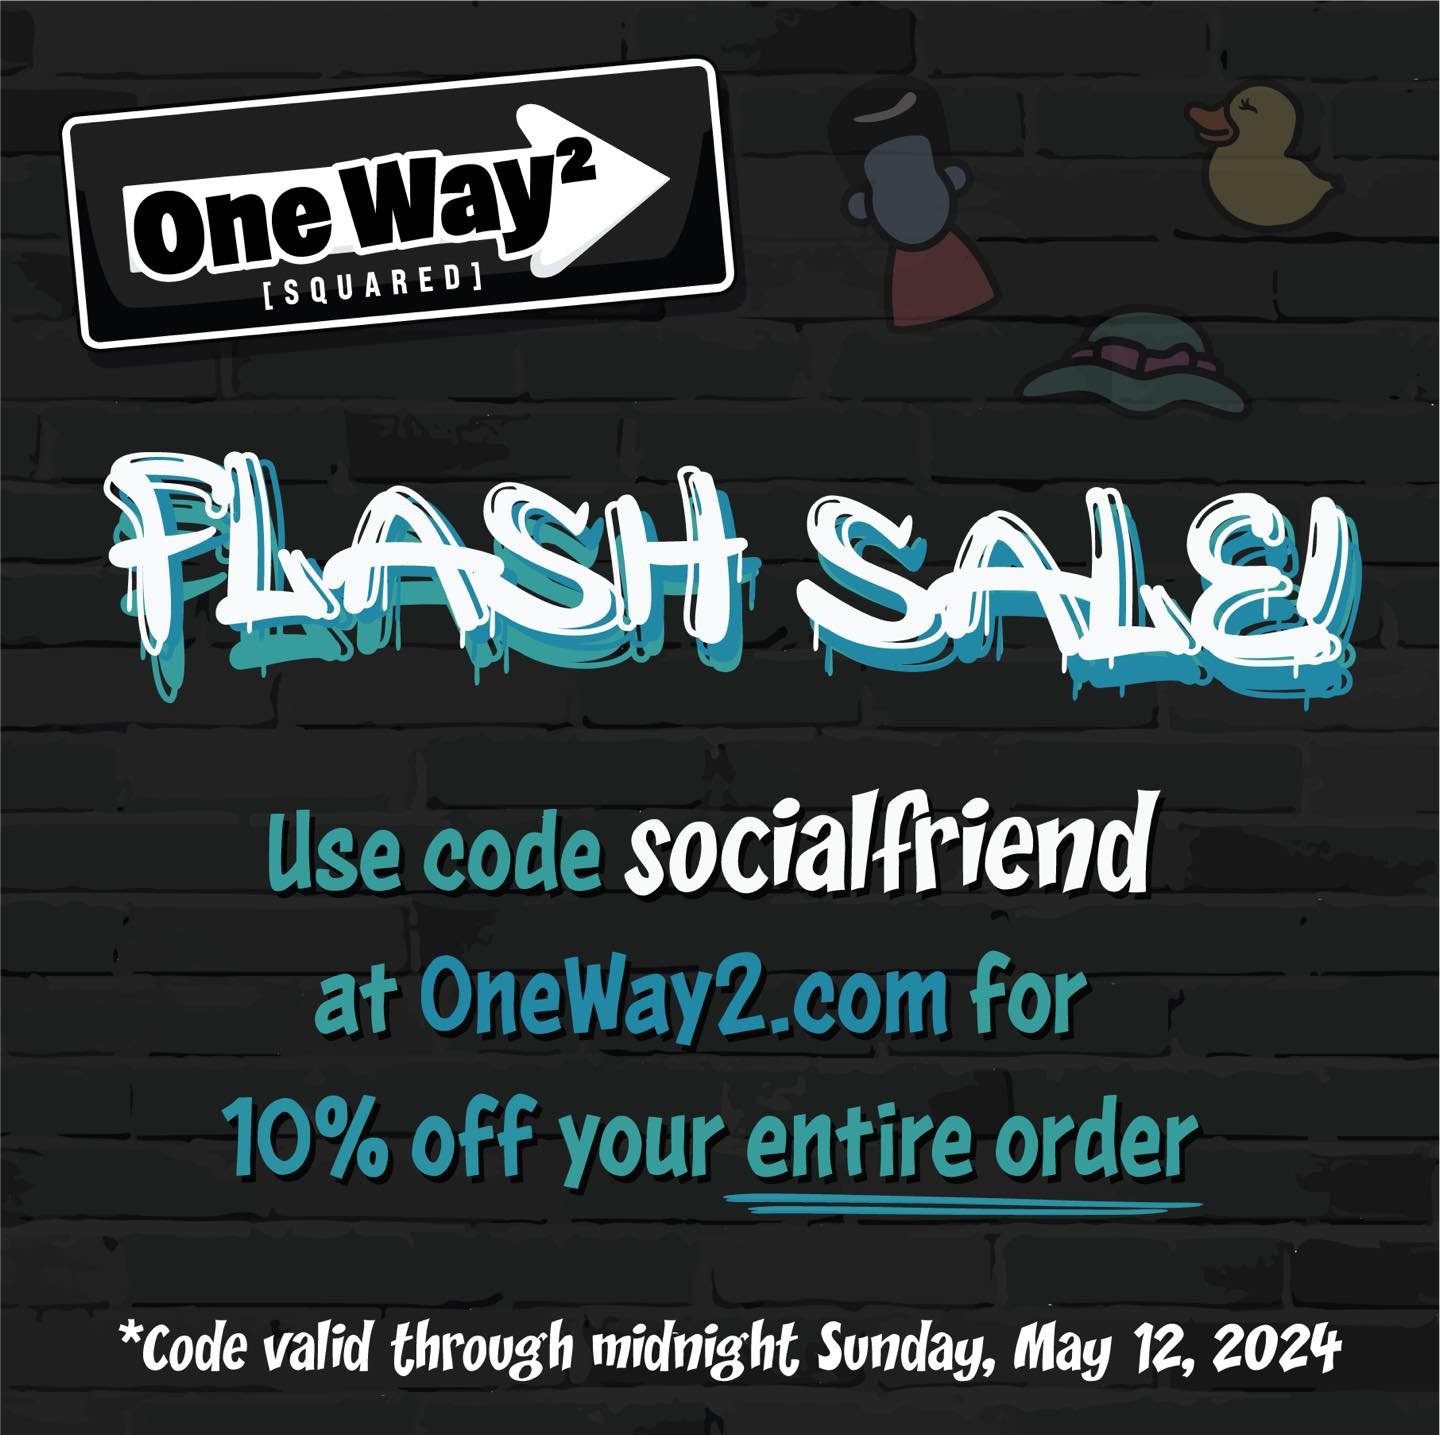 ⭐️📱Social Media Flash Sale📱⭐️

From now through Sunday* we are offering all of you who follow us on social media 10% off your ENTIRE order! 😃

Head on over to oneway2.com and use the code SOCIALFRIEND at checkout to receive your discount! Happy sh